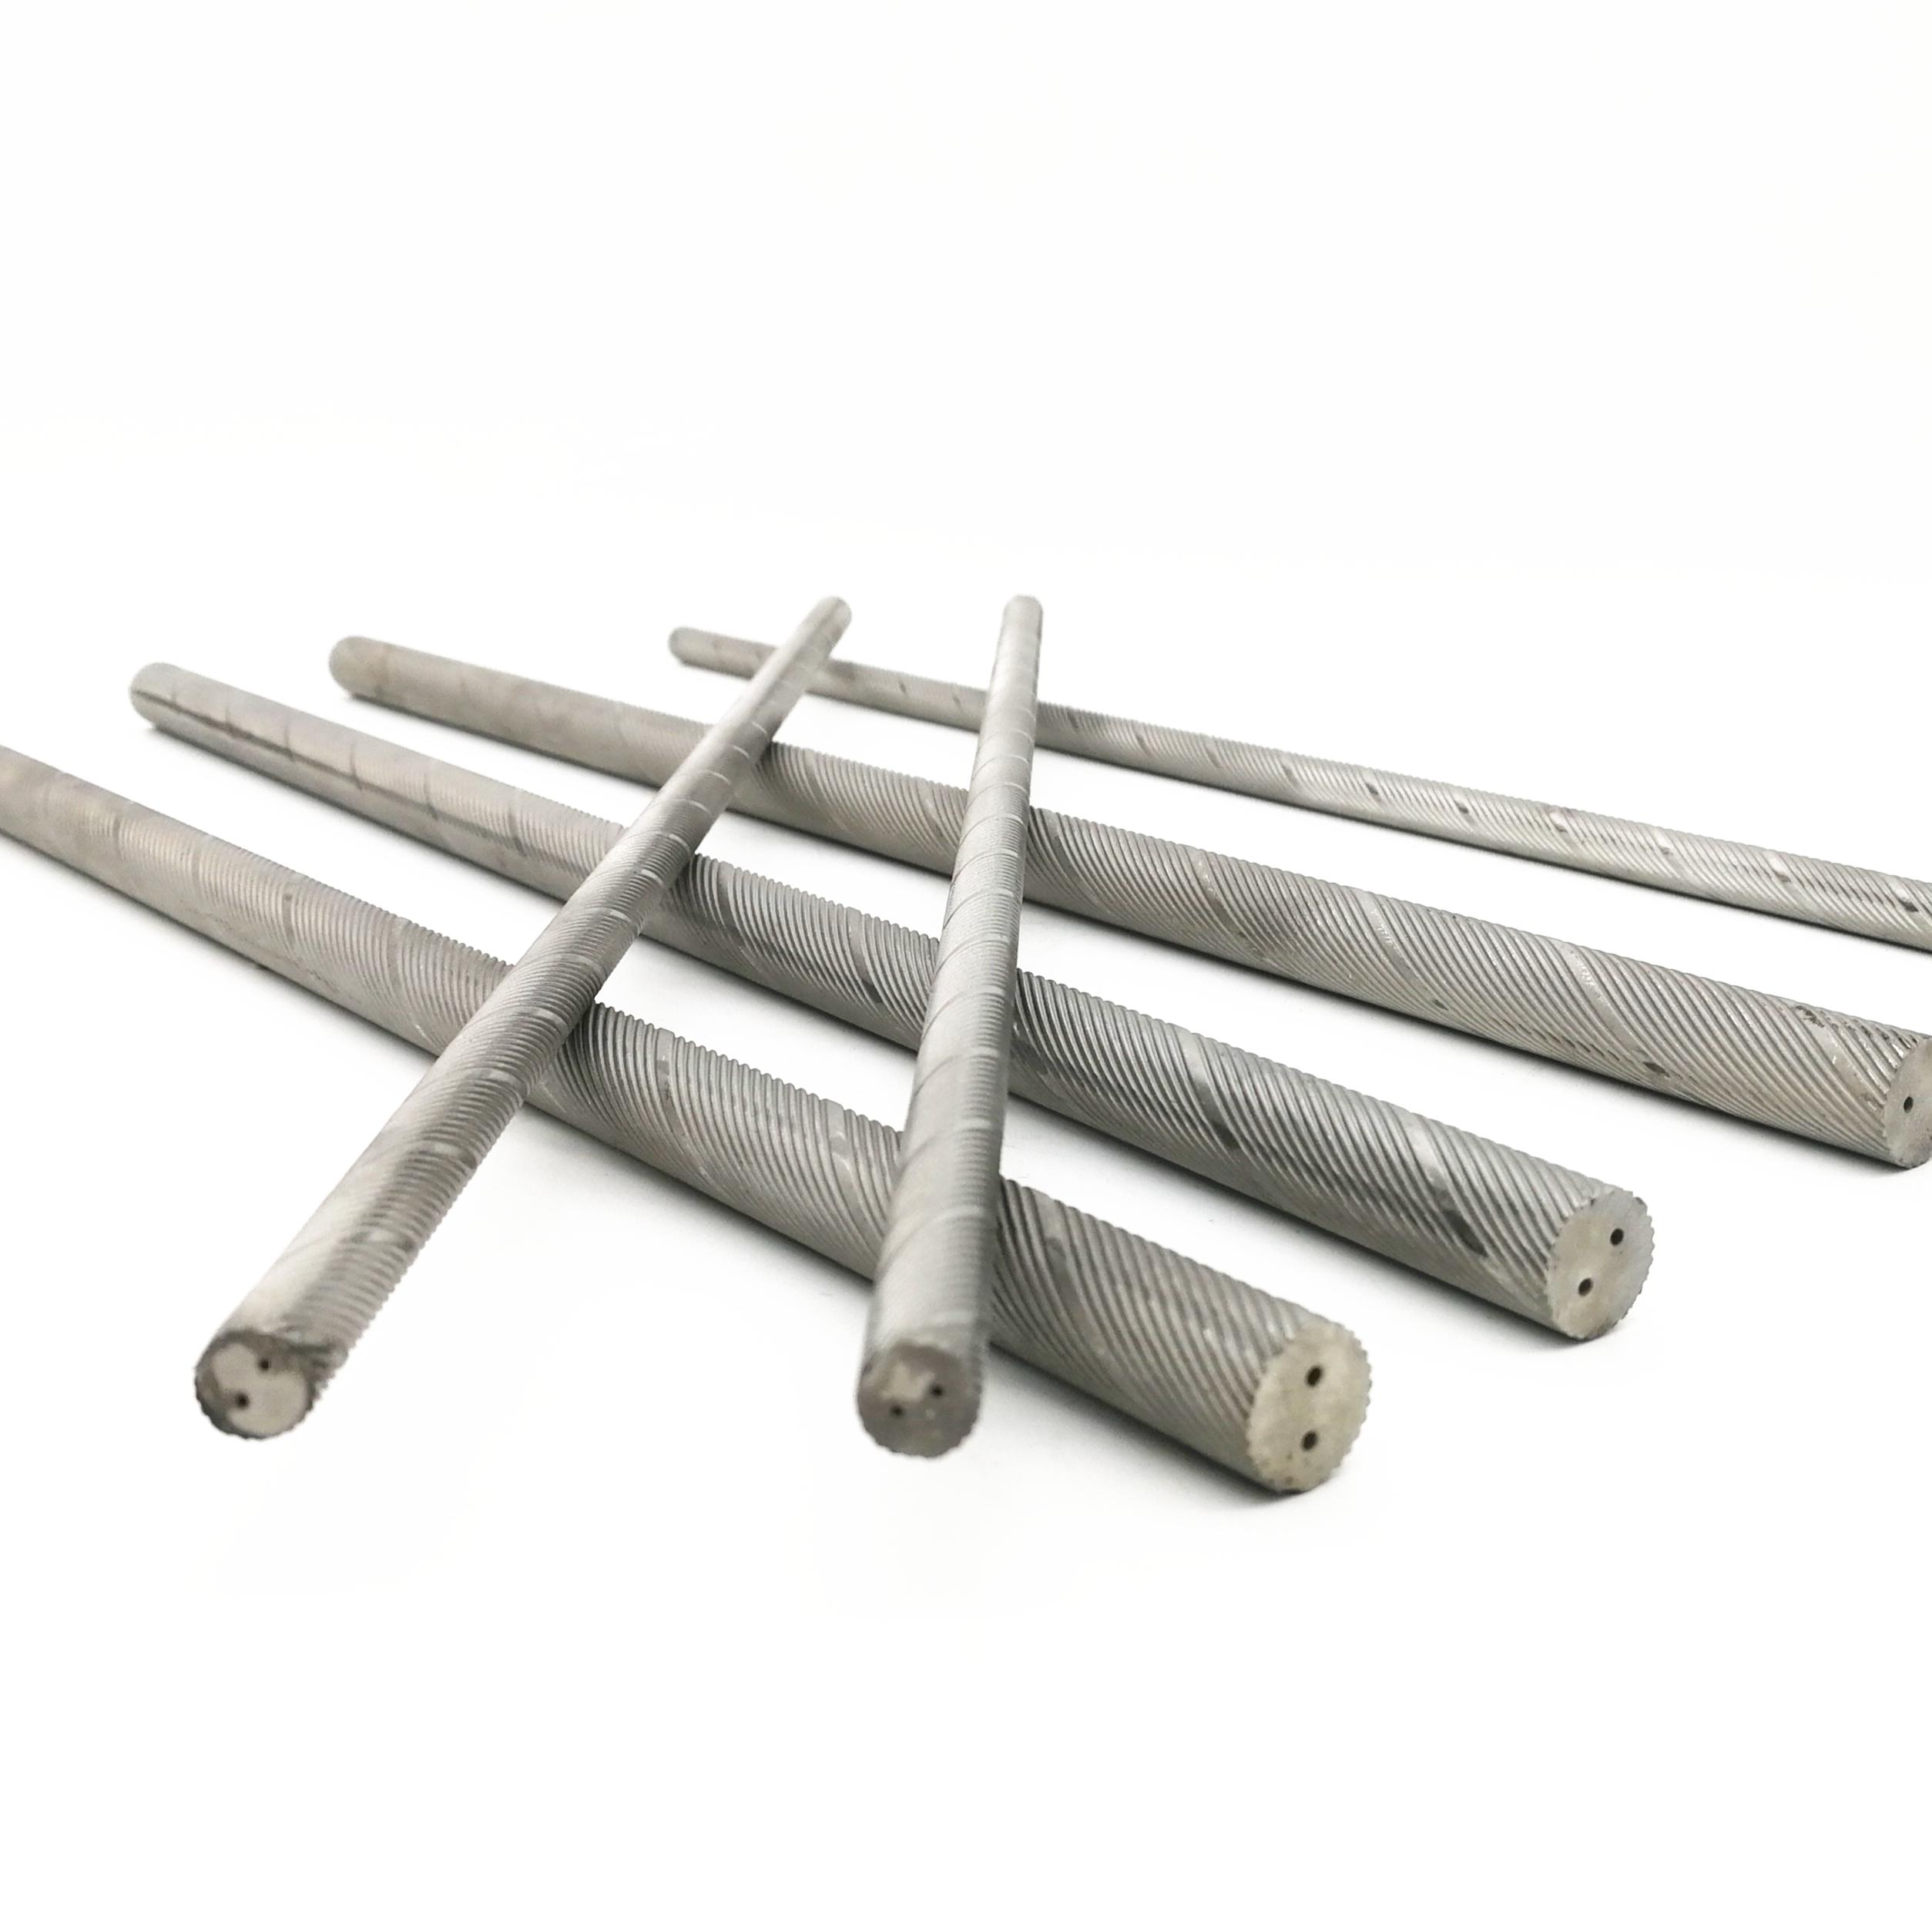 Carbide Rods for Metal and Wood working